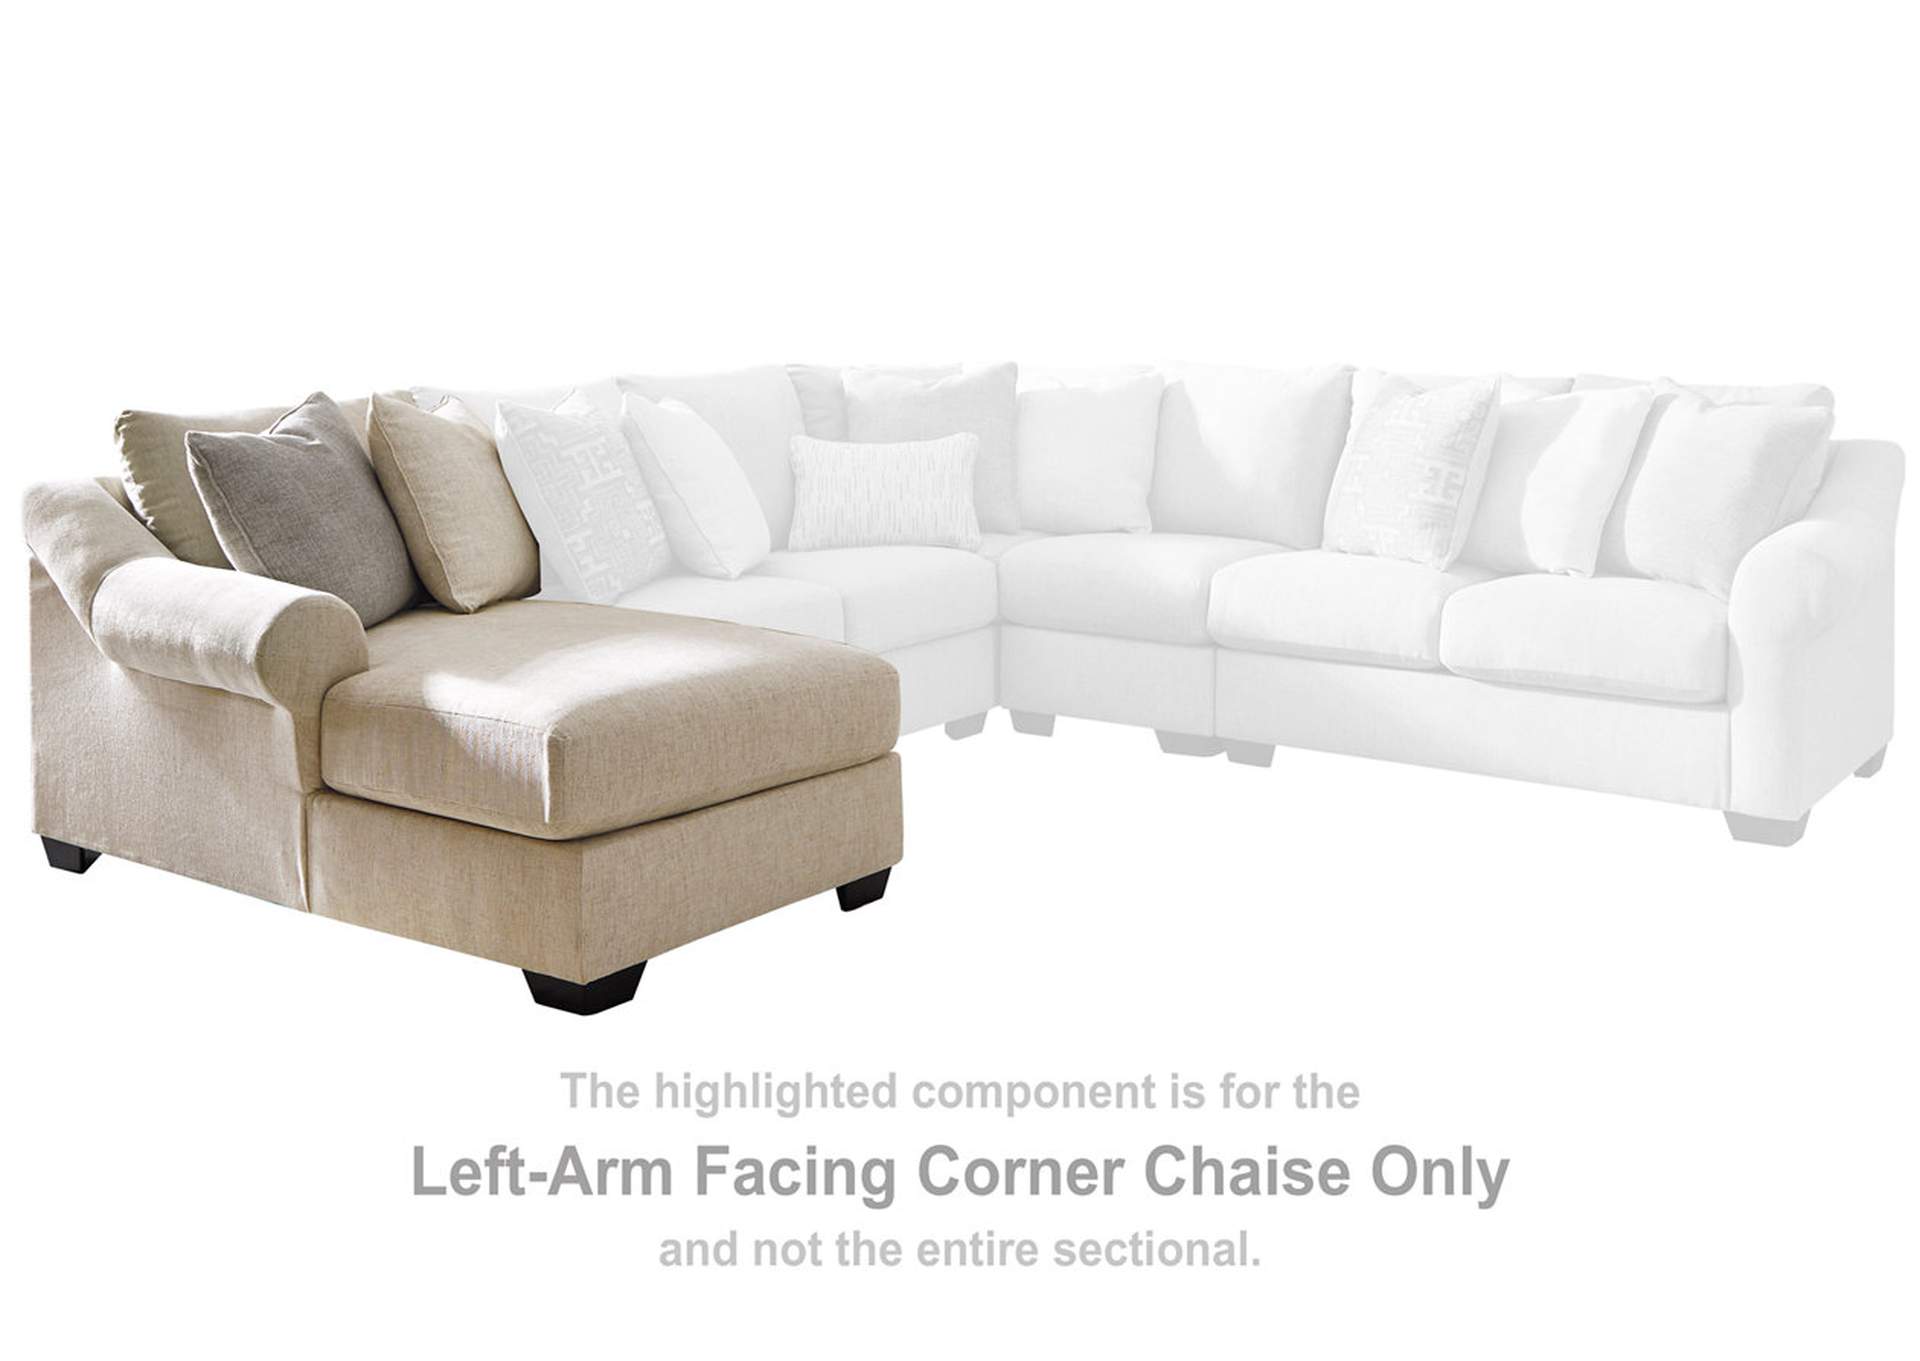 Carnaby 5-Piece Sectional with Chaise,Ashley